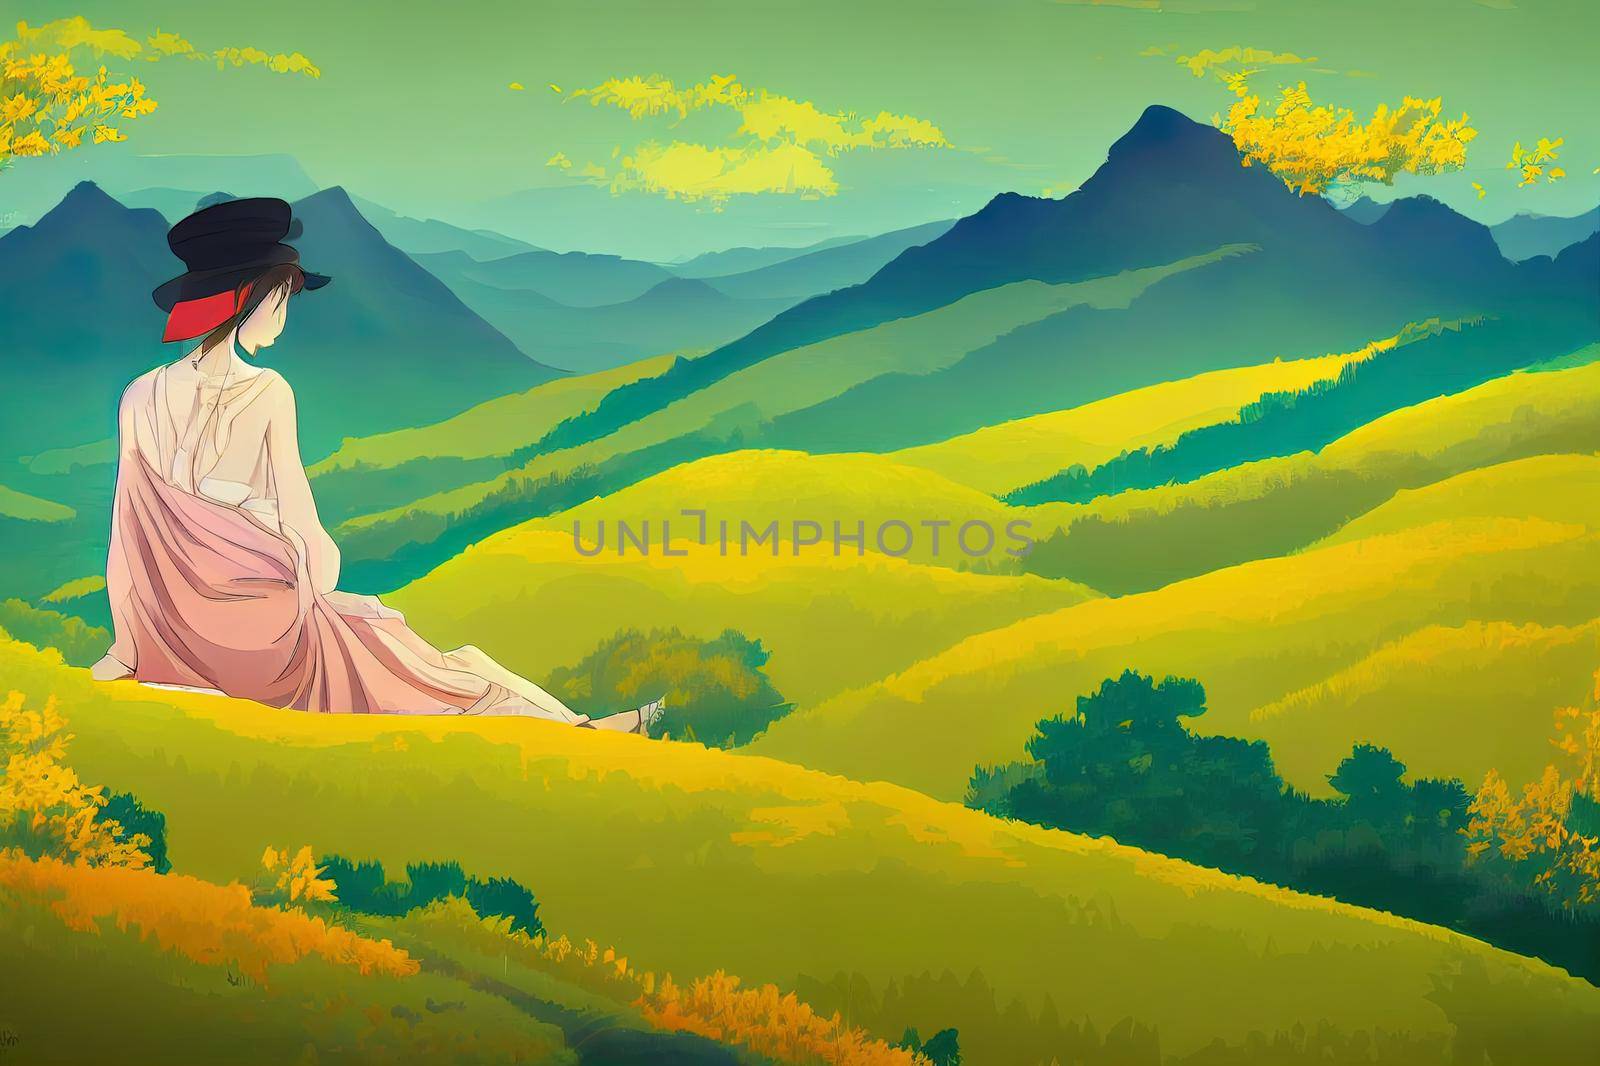 A young woman in a hat sitting on a blanket against the background of green and yellow mountains and hills Autumn landscape A girl nature lover enjoying a calmness of a rural scenery